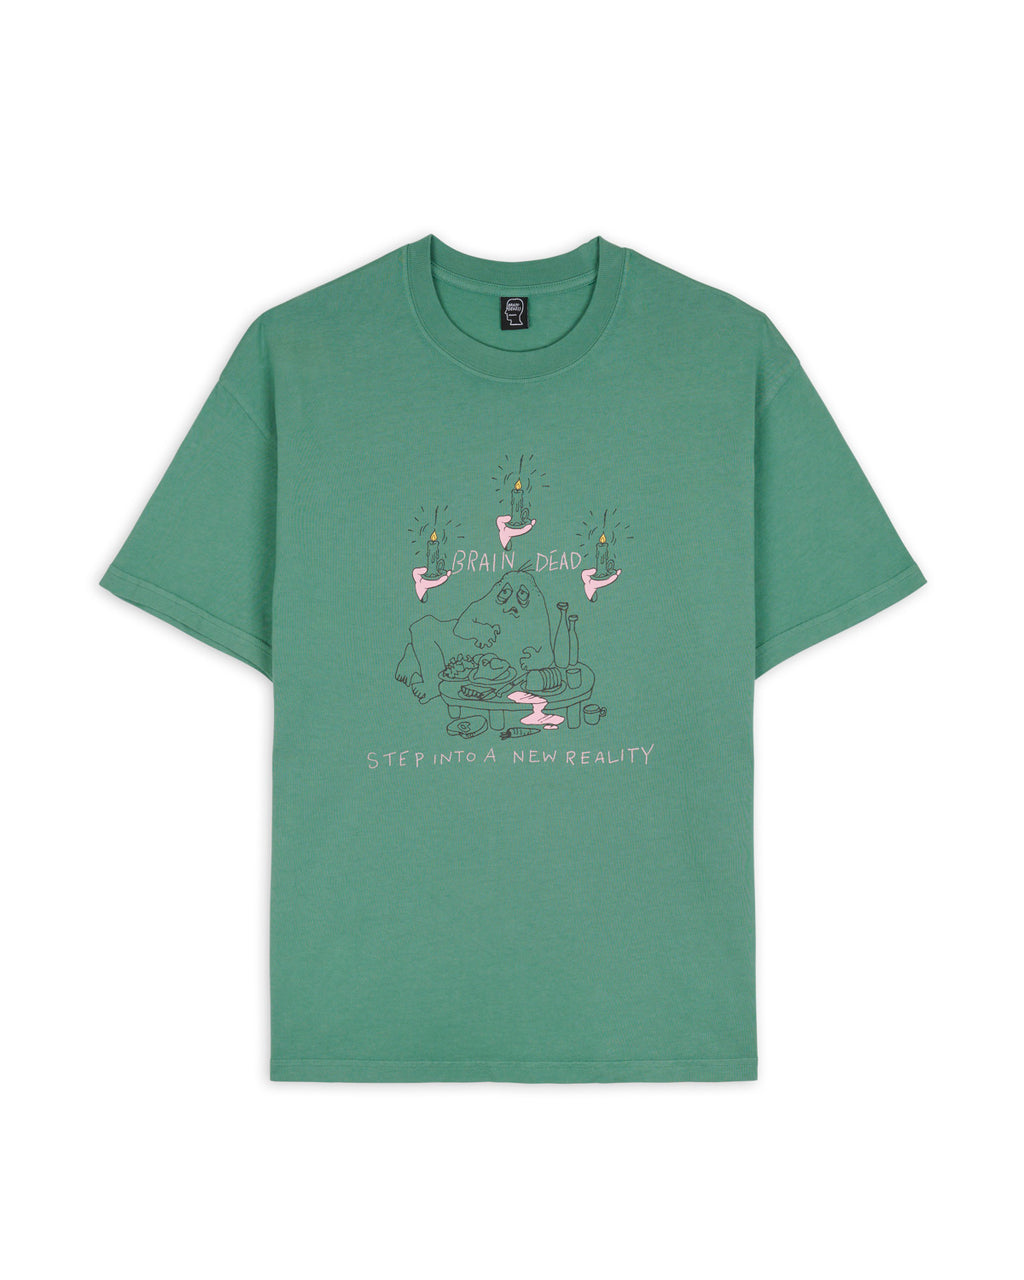 New Reality T-shirt - Green